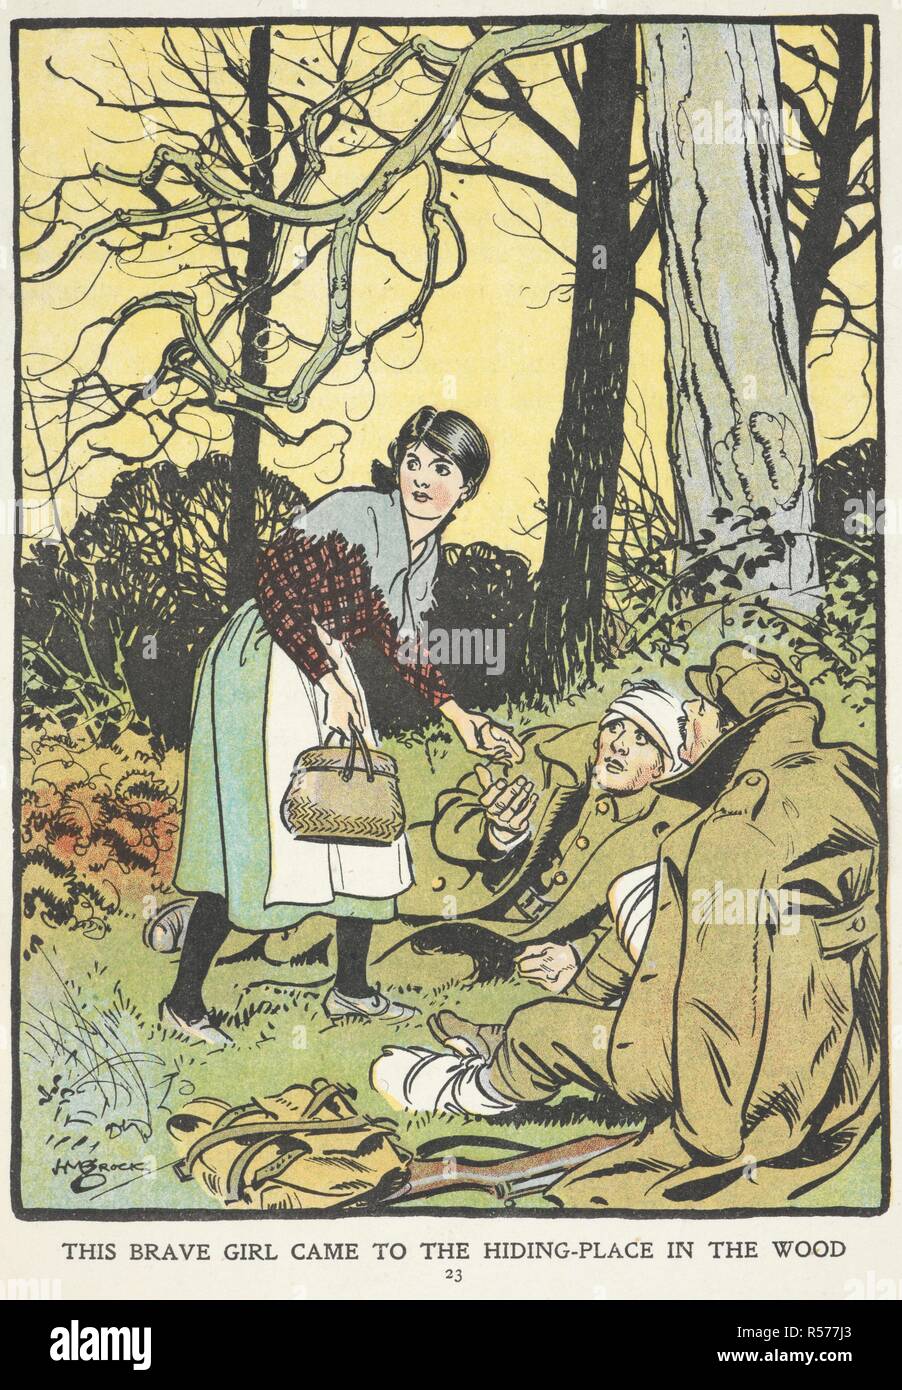 'This brave girl came to the hiding-place in the wood'. Colour illustration showing a young Belgian girl bringing food to wounded British soldiers hiding in the woods. Brave Boys and Girls in Wartime. True stories. London : Blackie & Son, [1918]. True stories of the First World War, 1914 - 1918. Source: 12802.dd.8 page 23. Author: Lea, John. Stock Photo